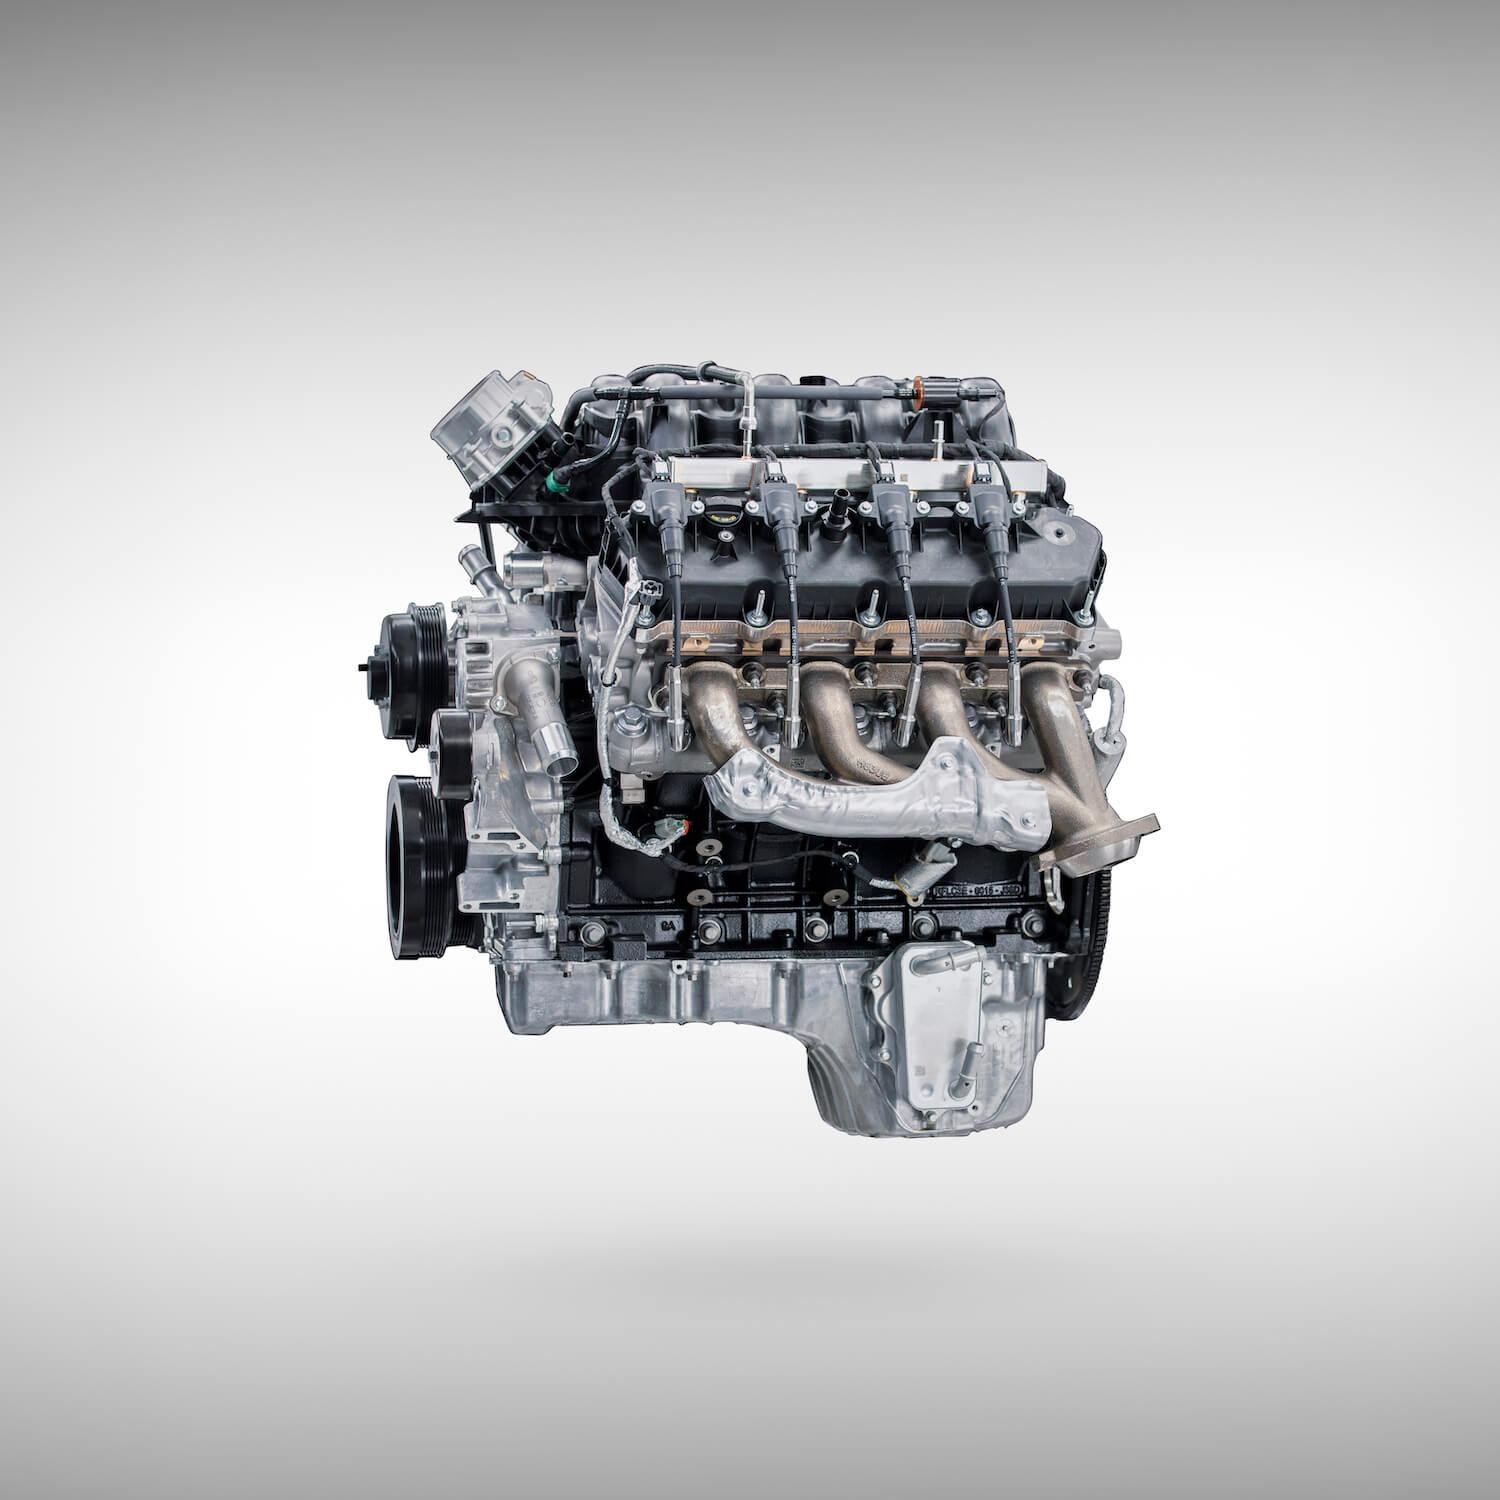 This is a 6.8-liter V8 engine with eight cylinders built by Ford Motor Company for its super duty pickup trucks.